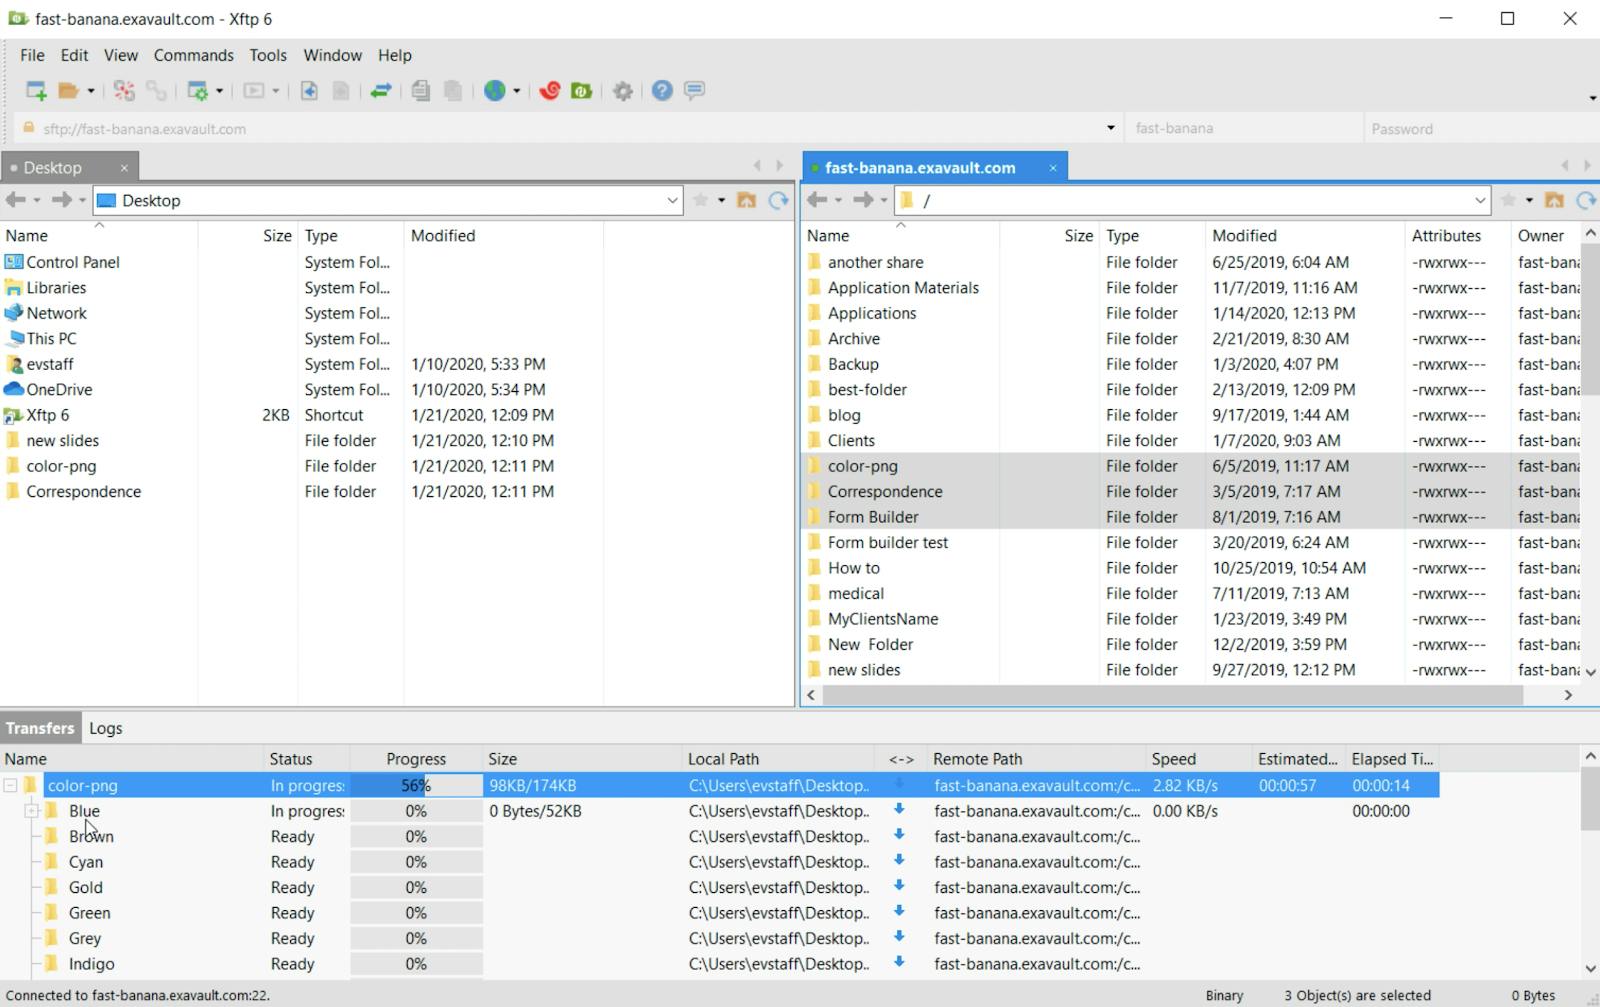 View file transfer status in XFTP application.